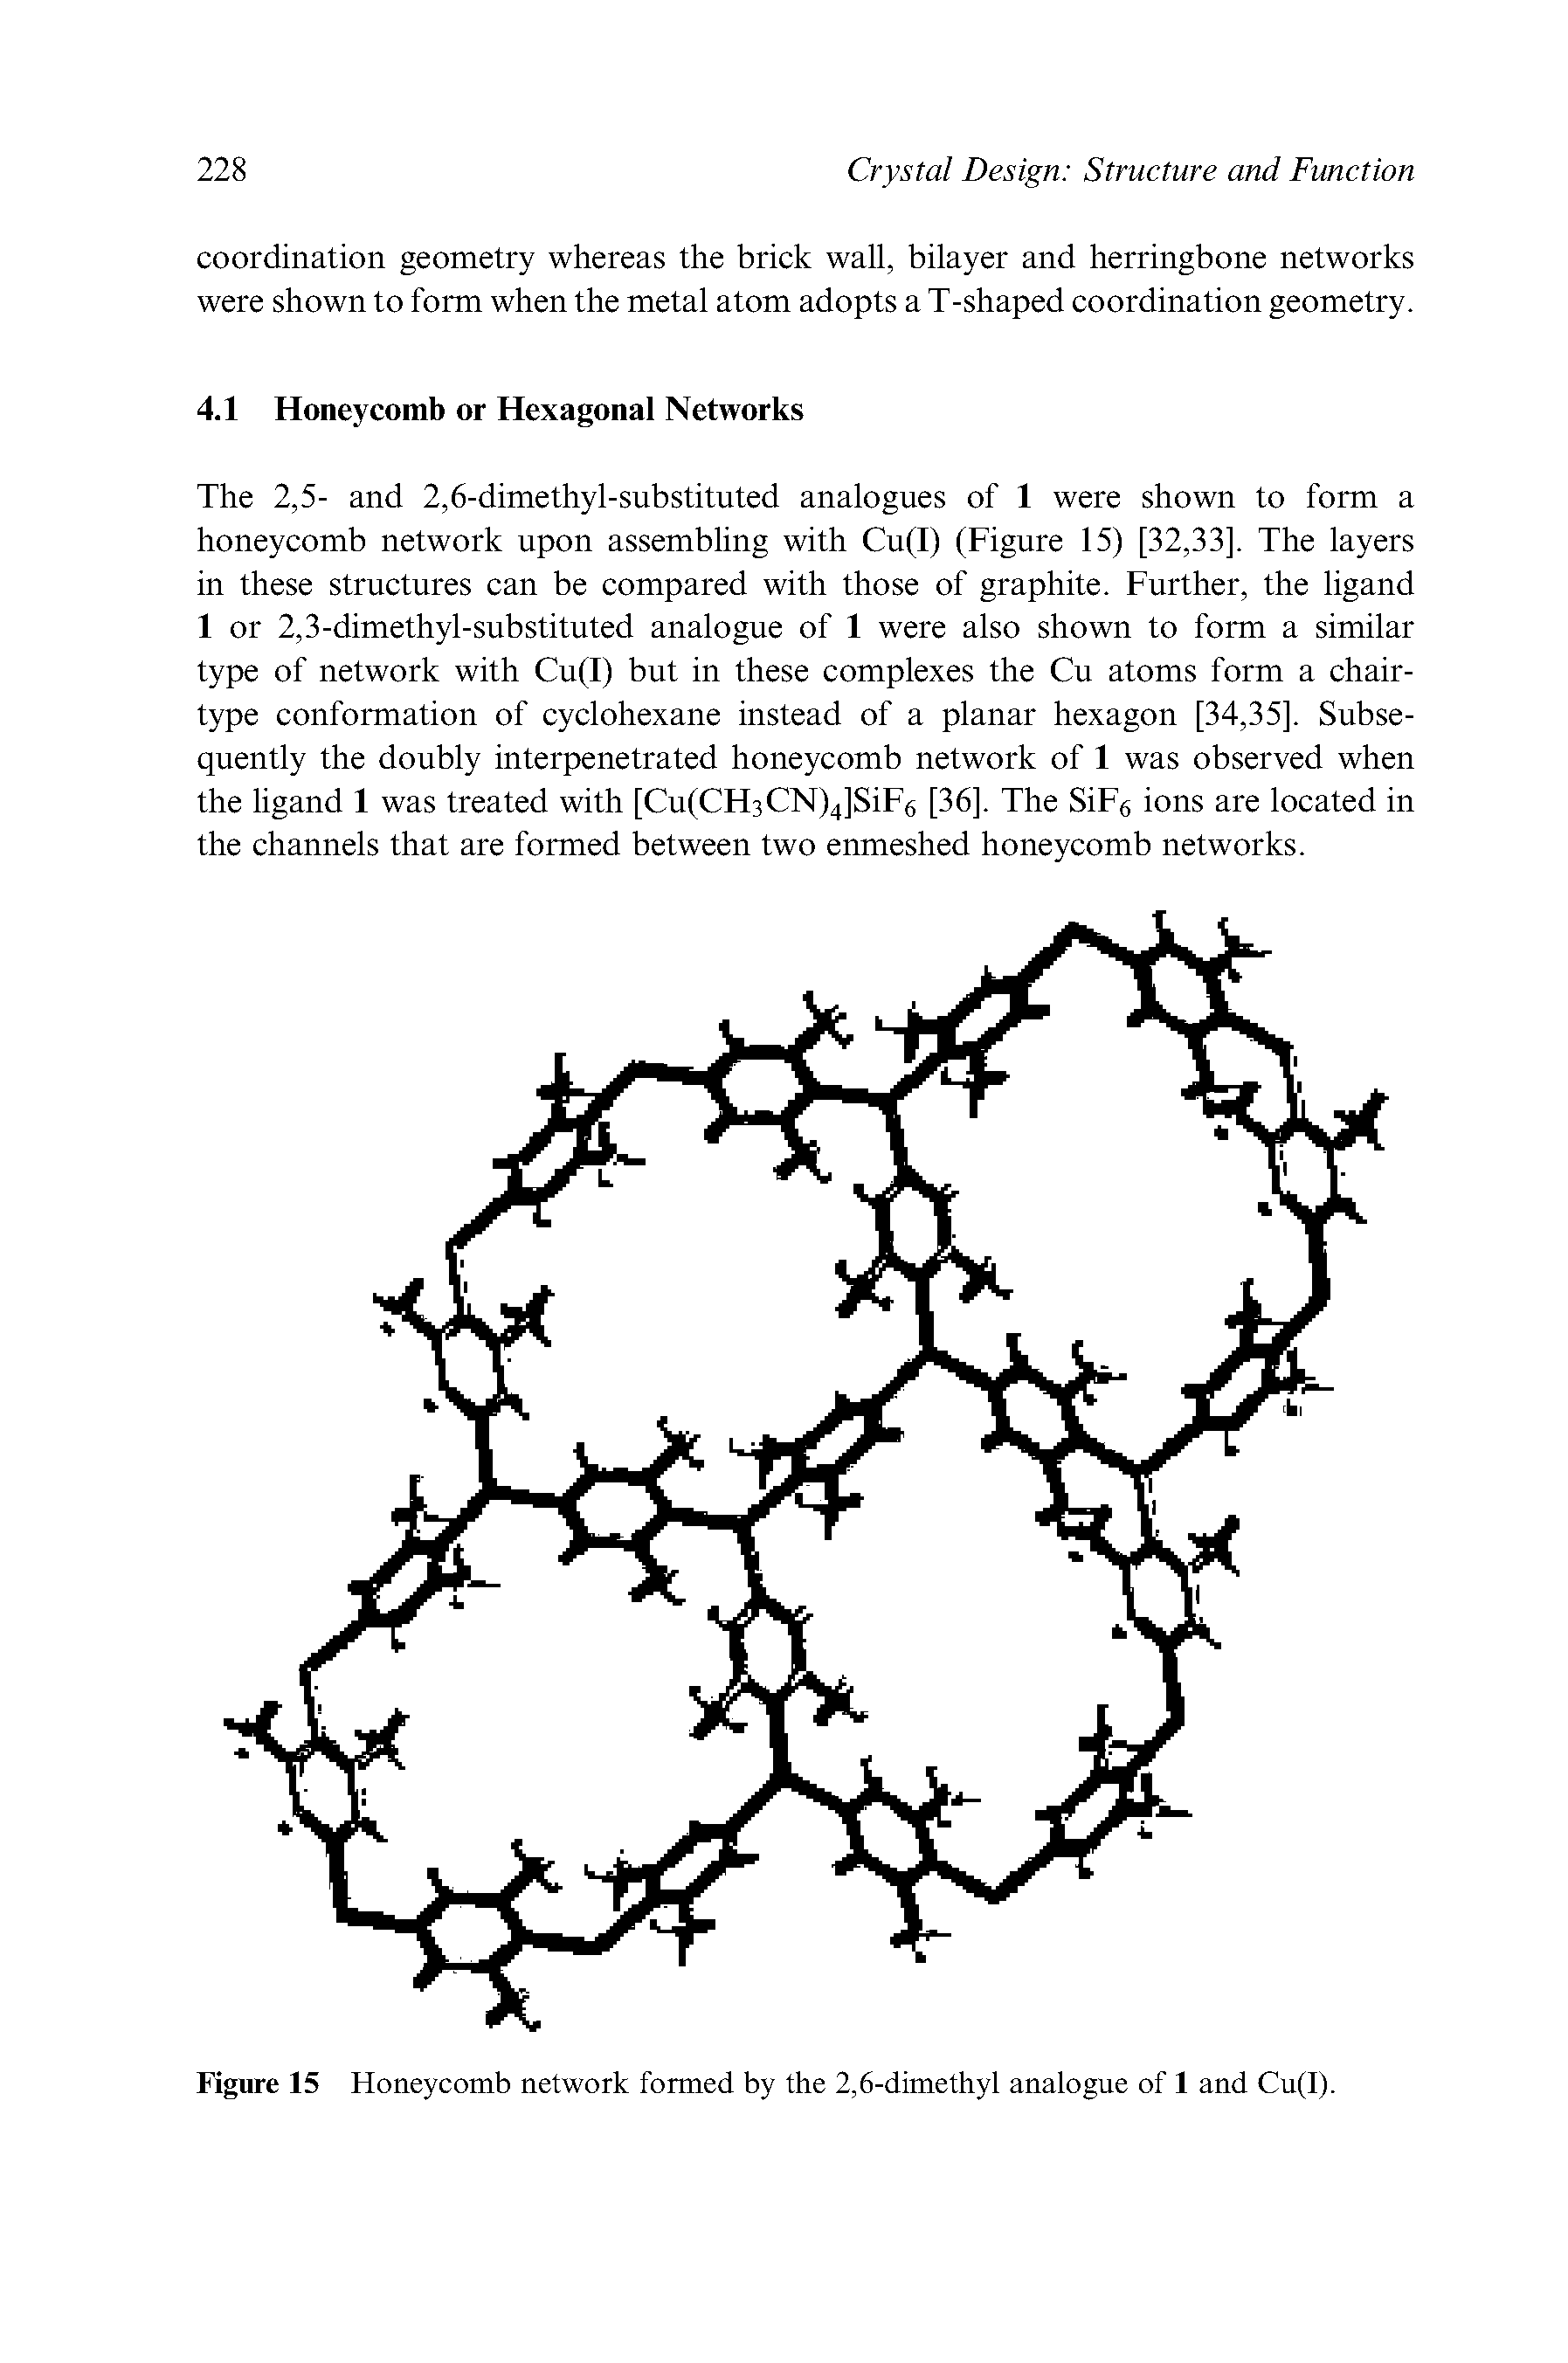 Figure 15 Honeycomb network formed by the 2,6-dimethyl analogue of 1 and Cu(I).